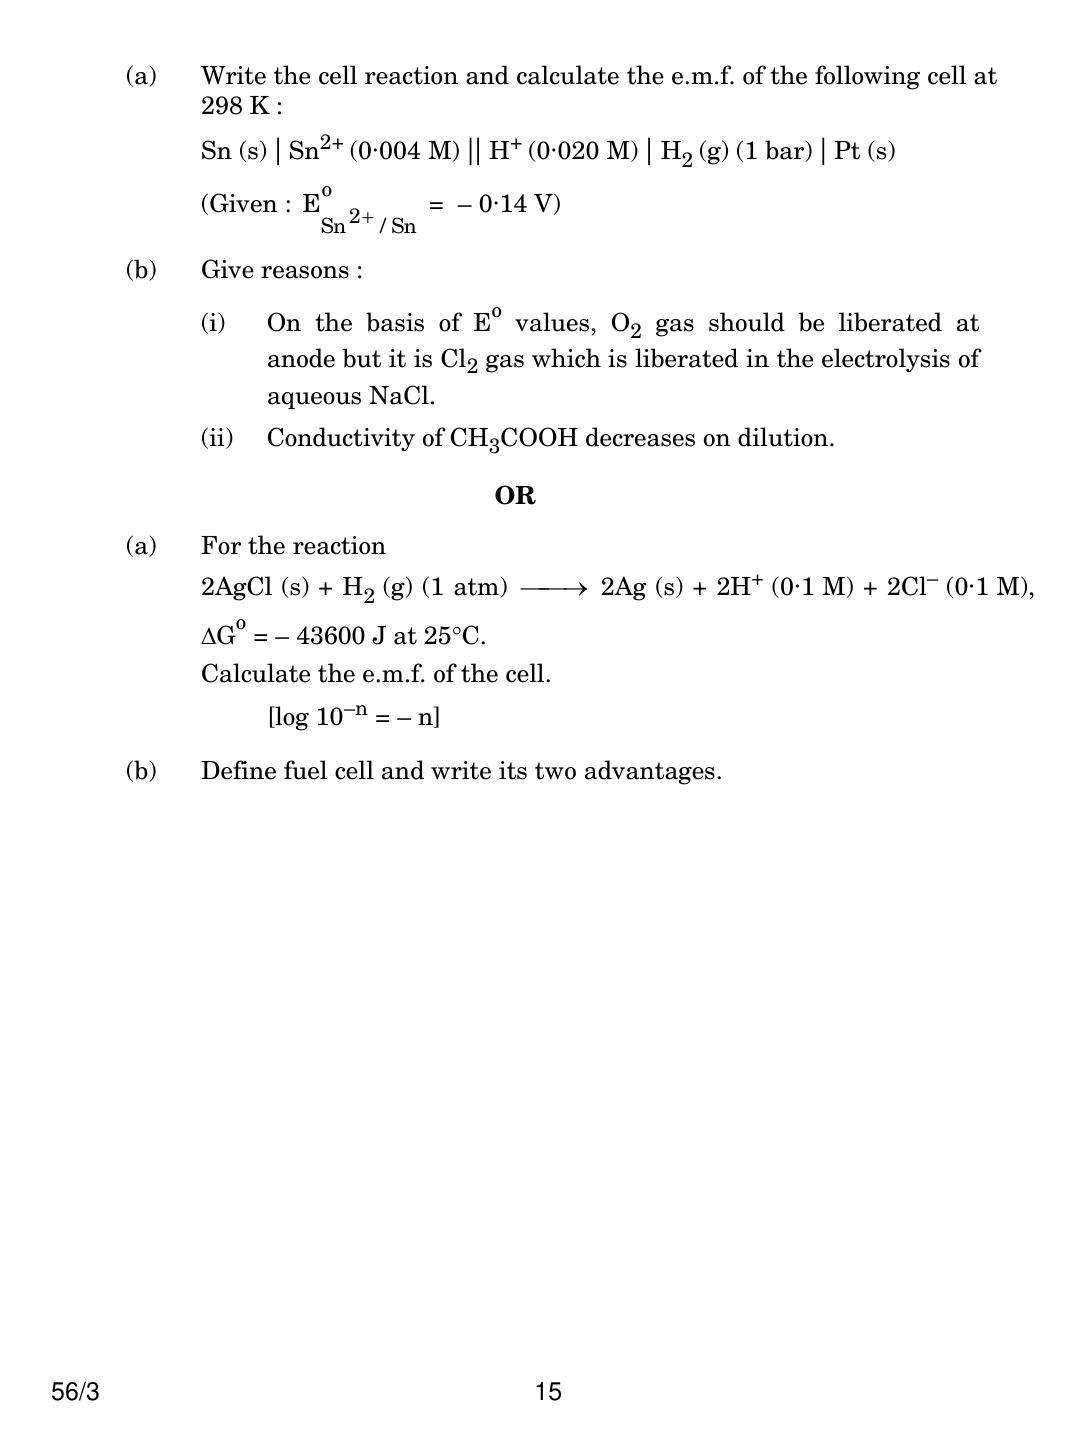 CBSE Class 12 56-3 CHEMISTRY 2018 Question Paper - Page 15